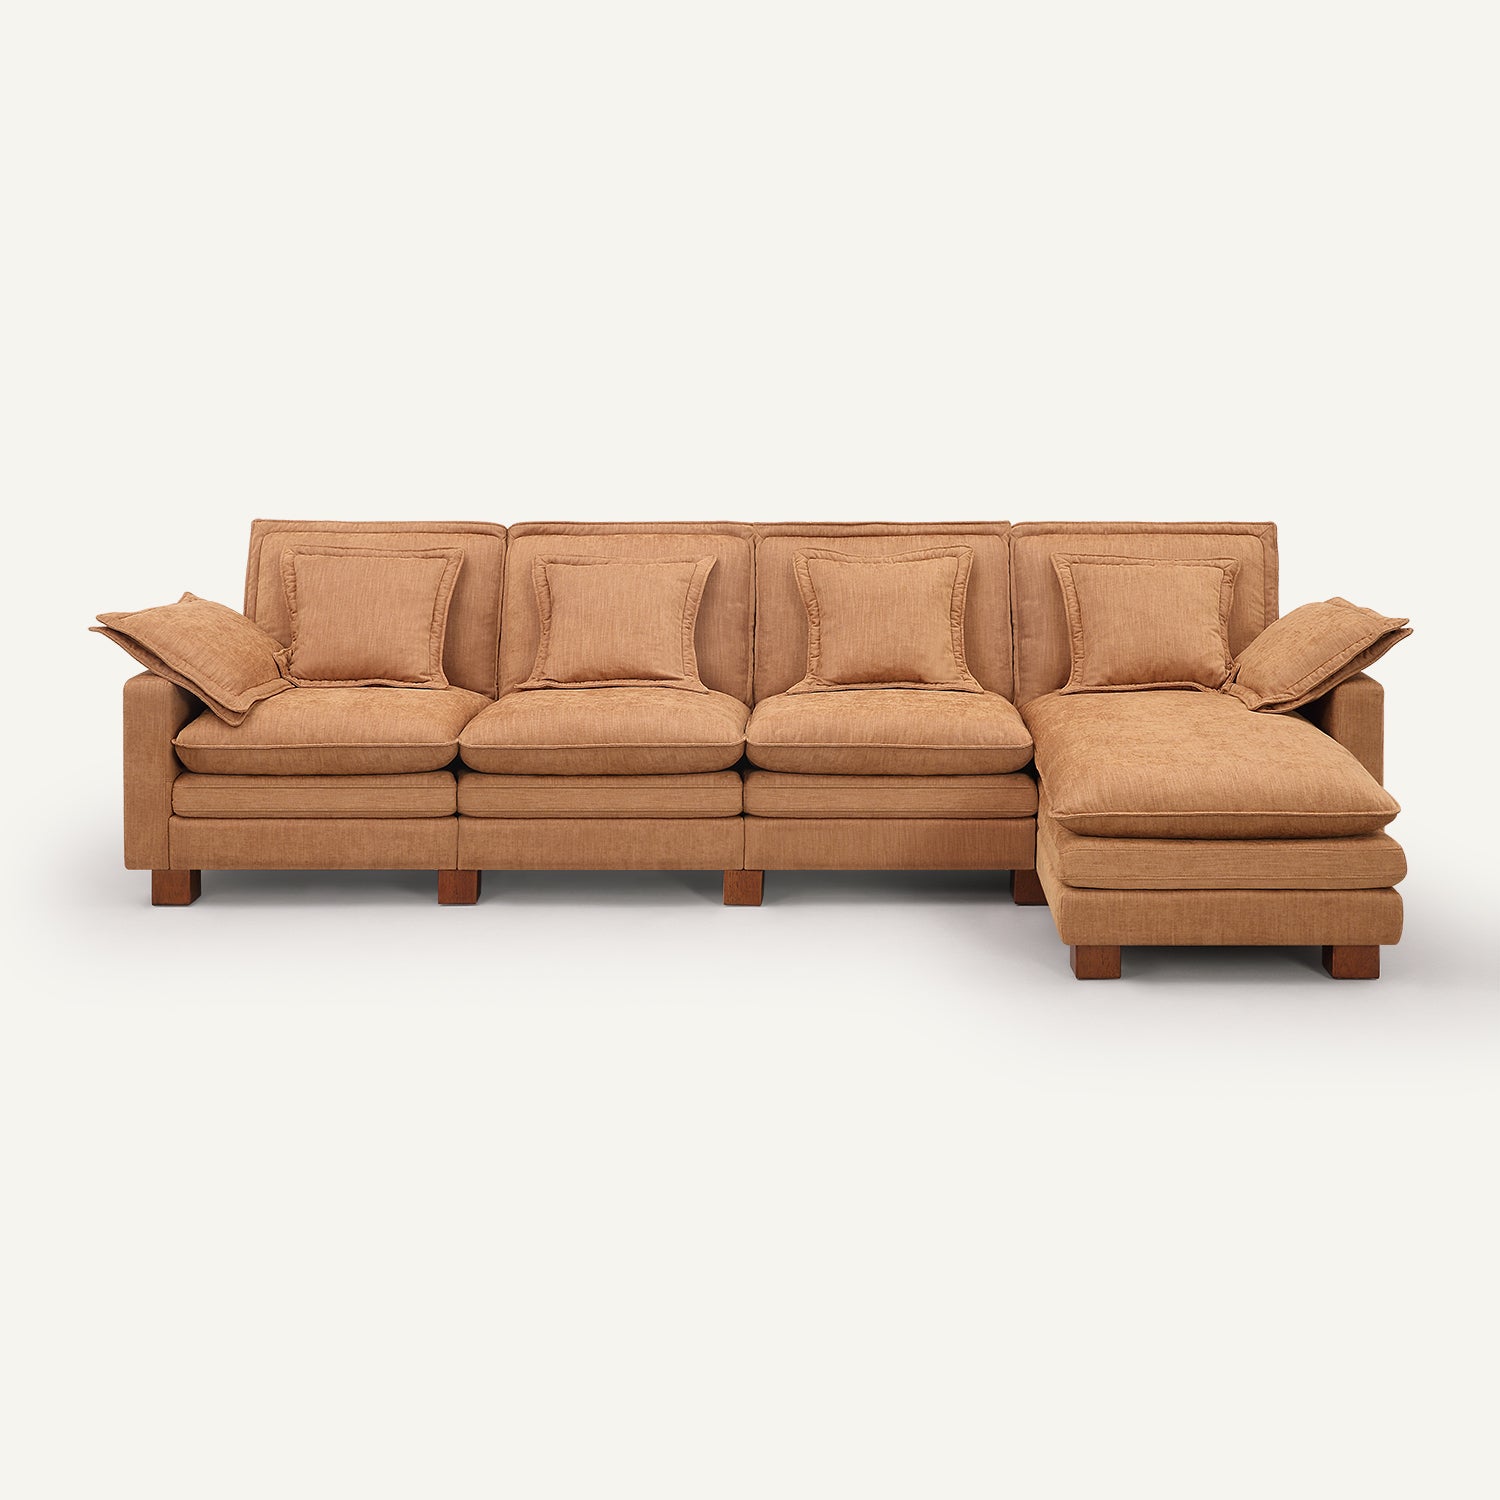 Stacked Tan Linen 4-Seat Sofa with Chaise